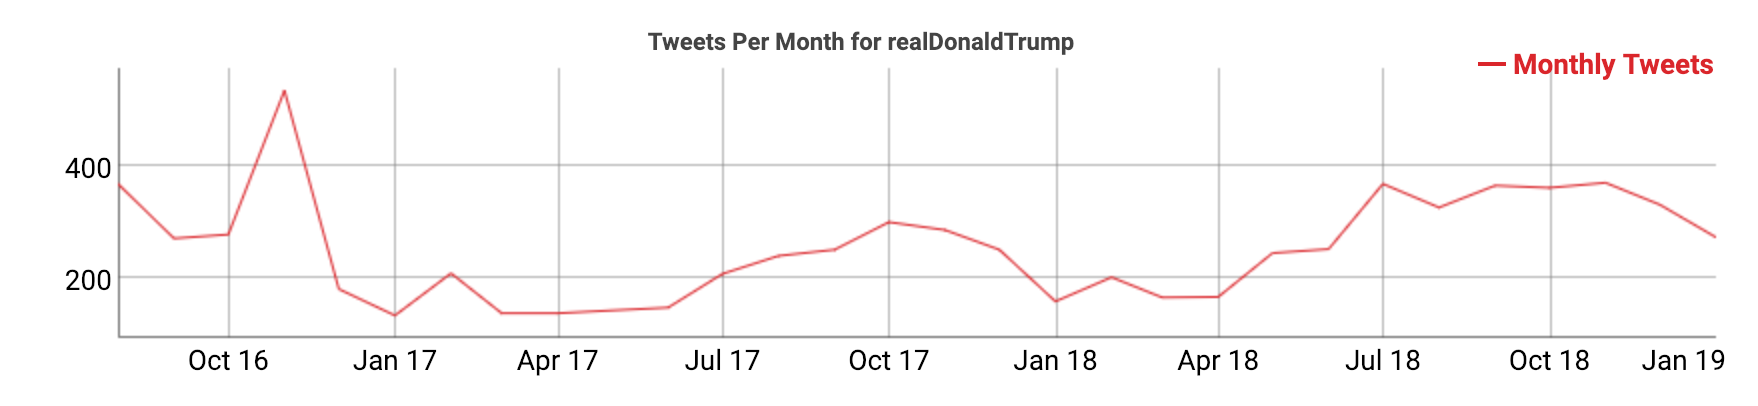 Trump's been tweeting a lot, lately